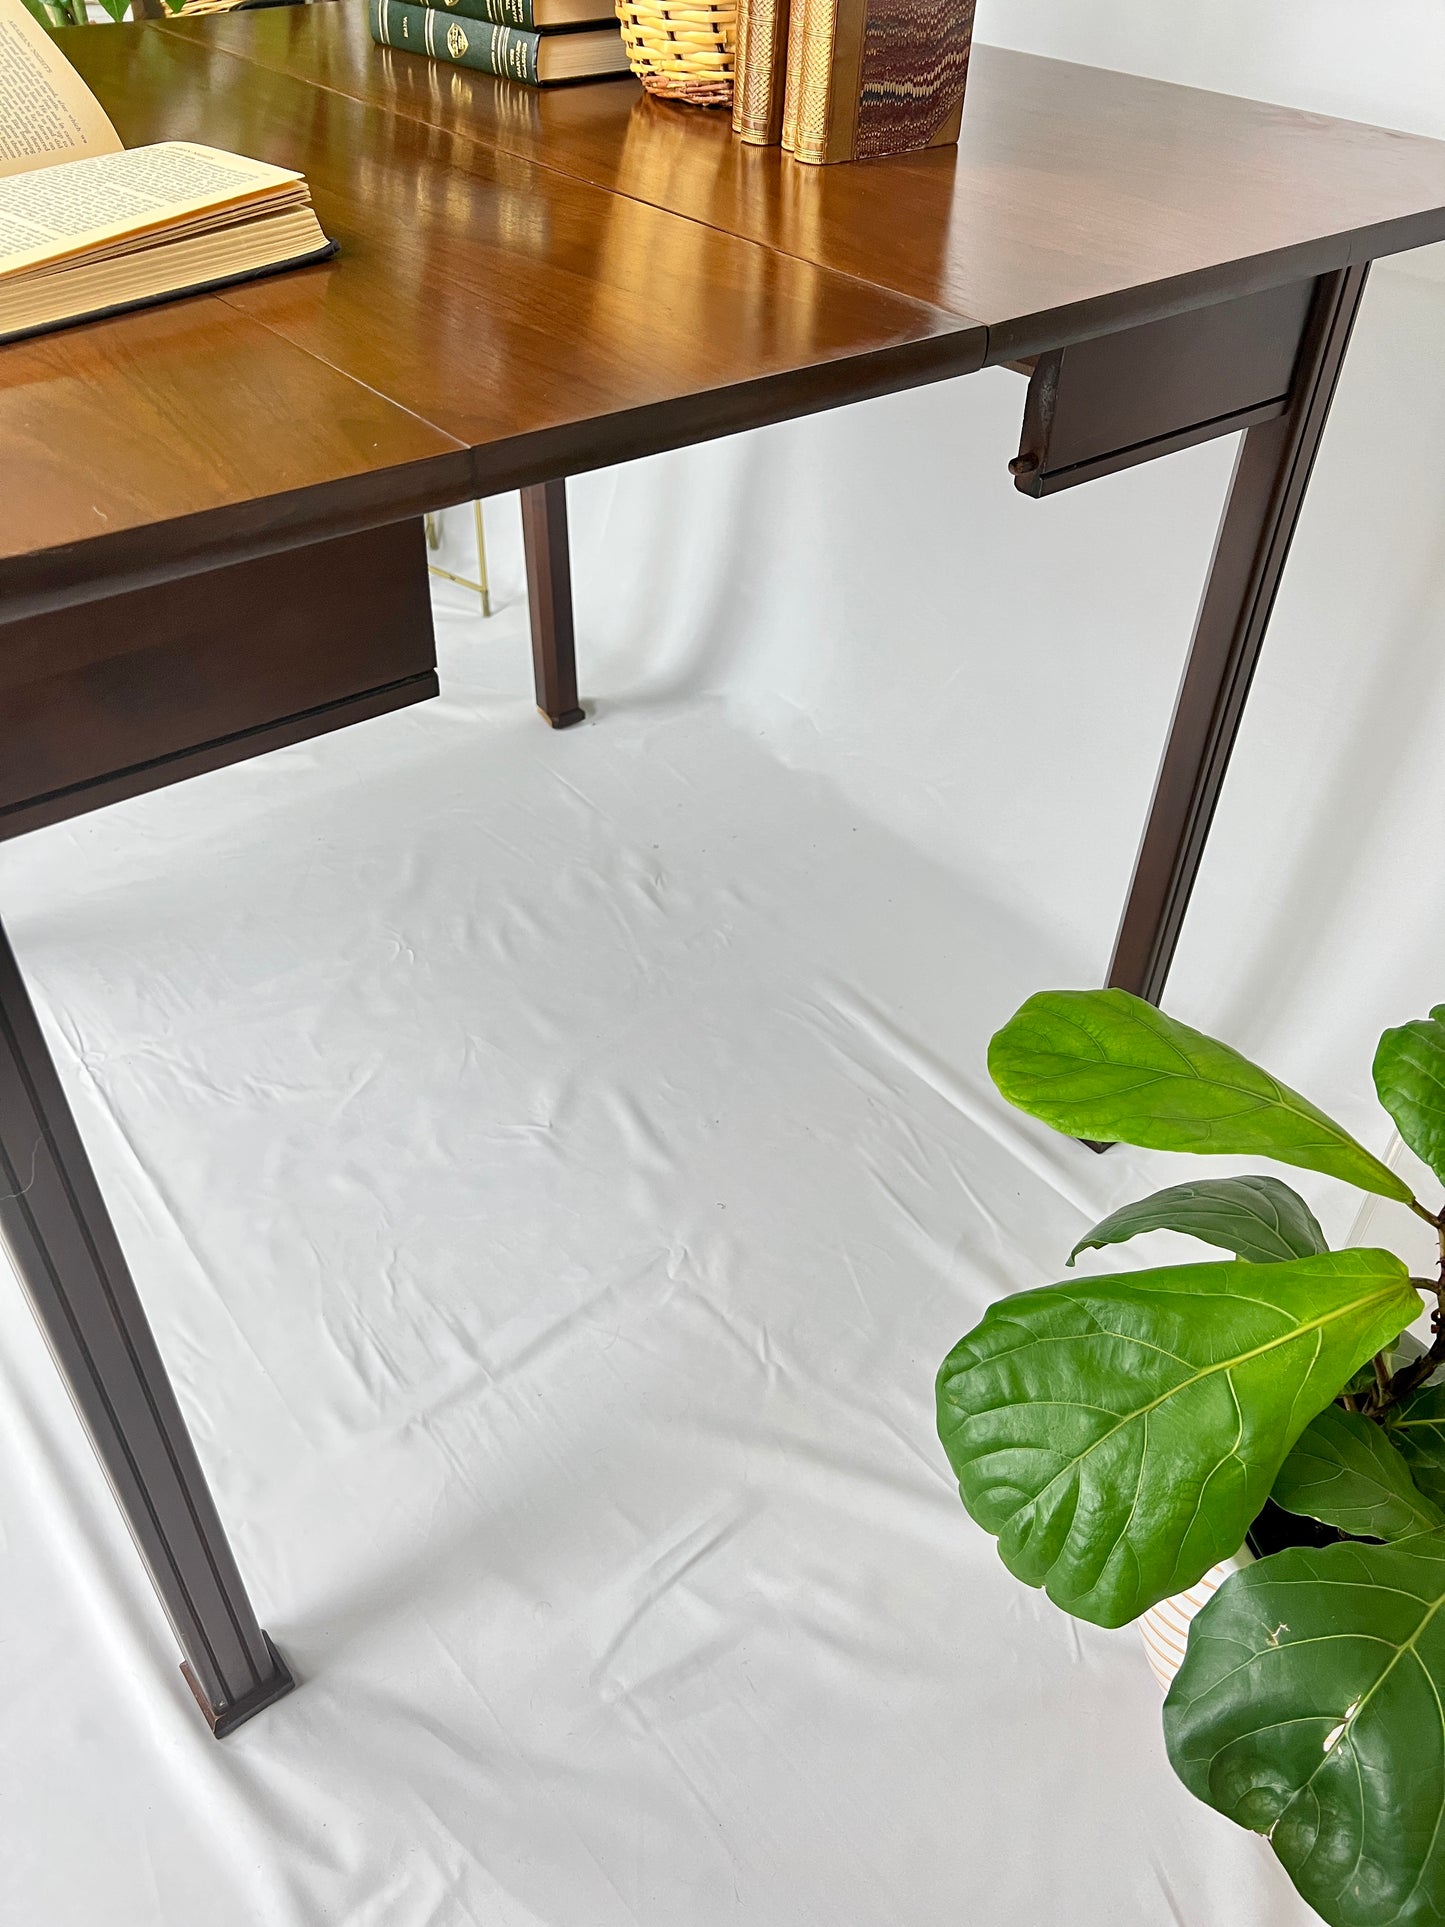 The Copperfield Folding Table